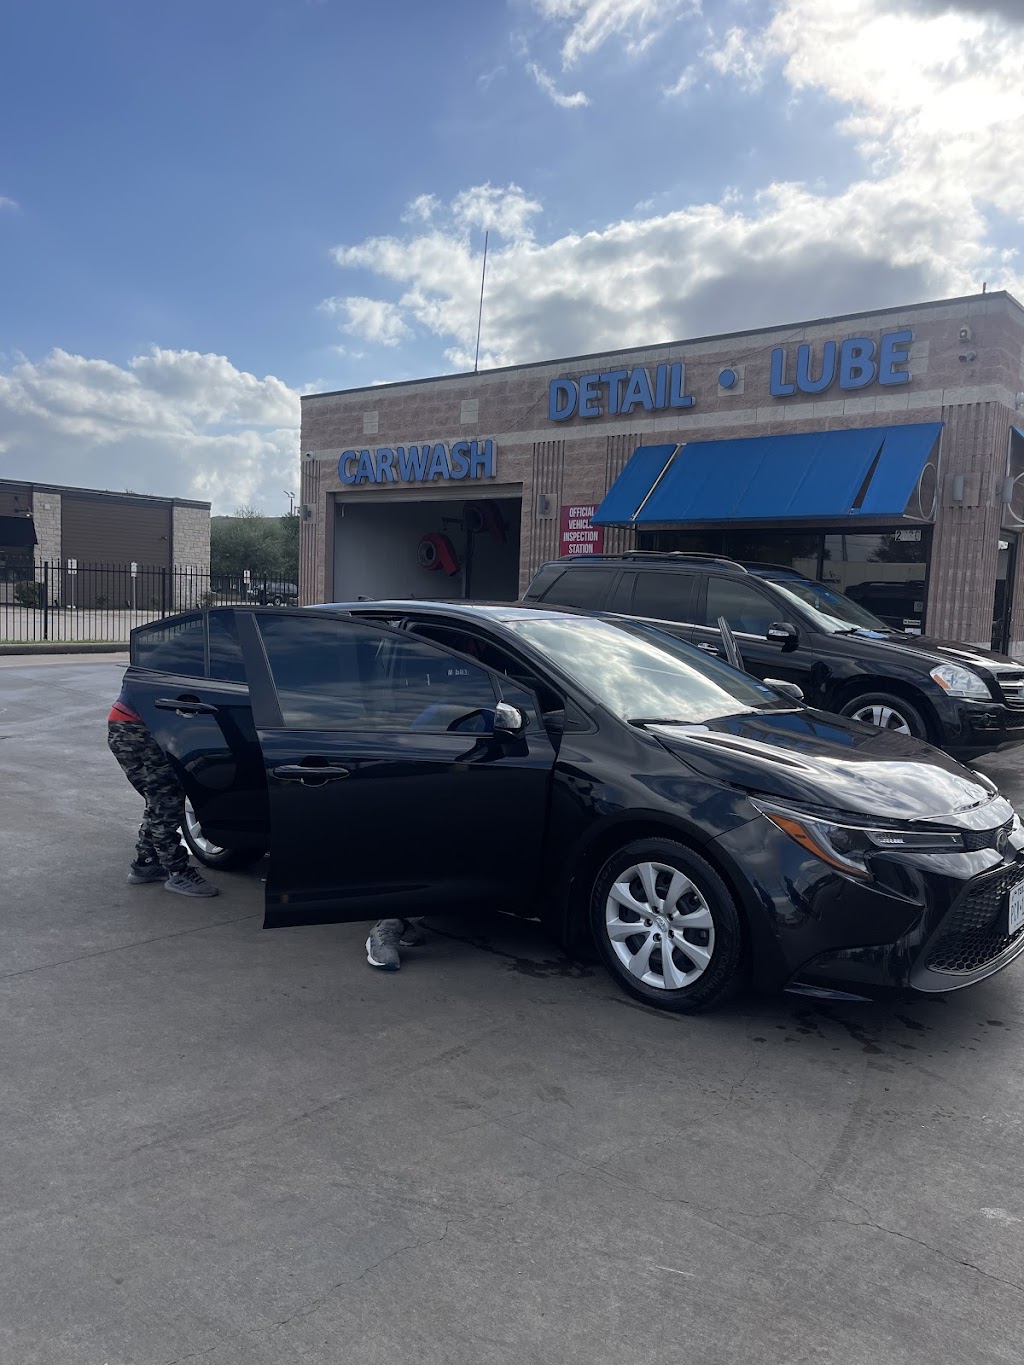 Oshun Express Car Wash and Oil Change | 2030 Hwy 6 Suite A, Houston, TX 77077 | Phone: (713) 701-9229